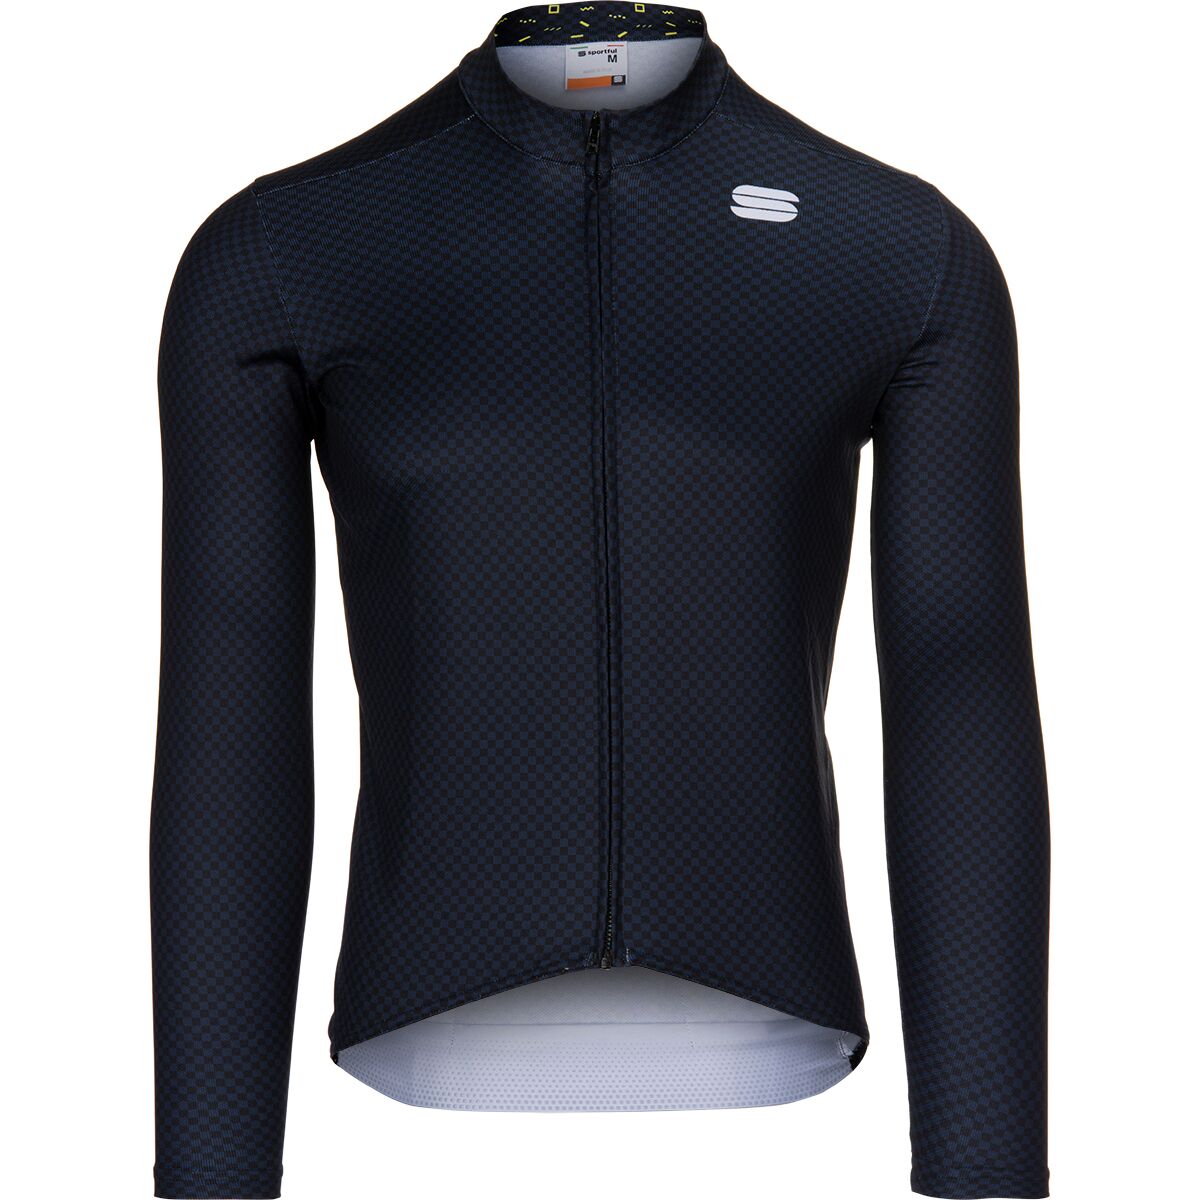 Sportful Checkmate Thermal Jersey - Men's